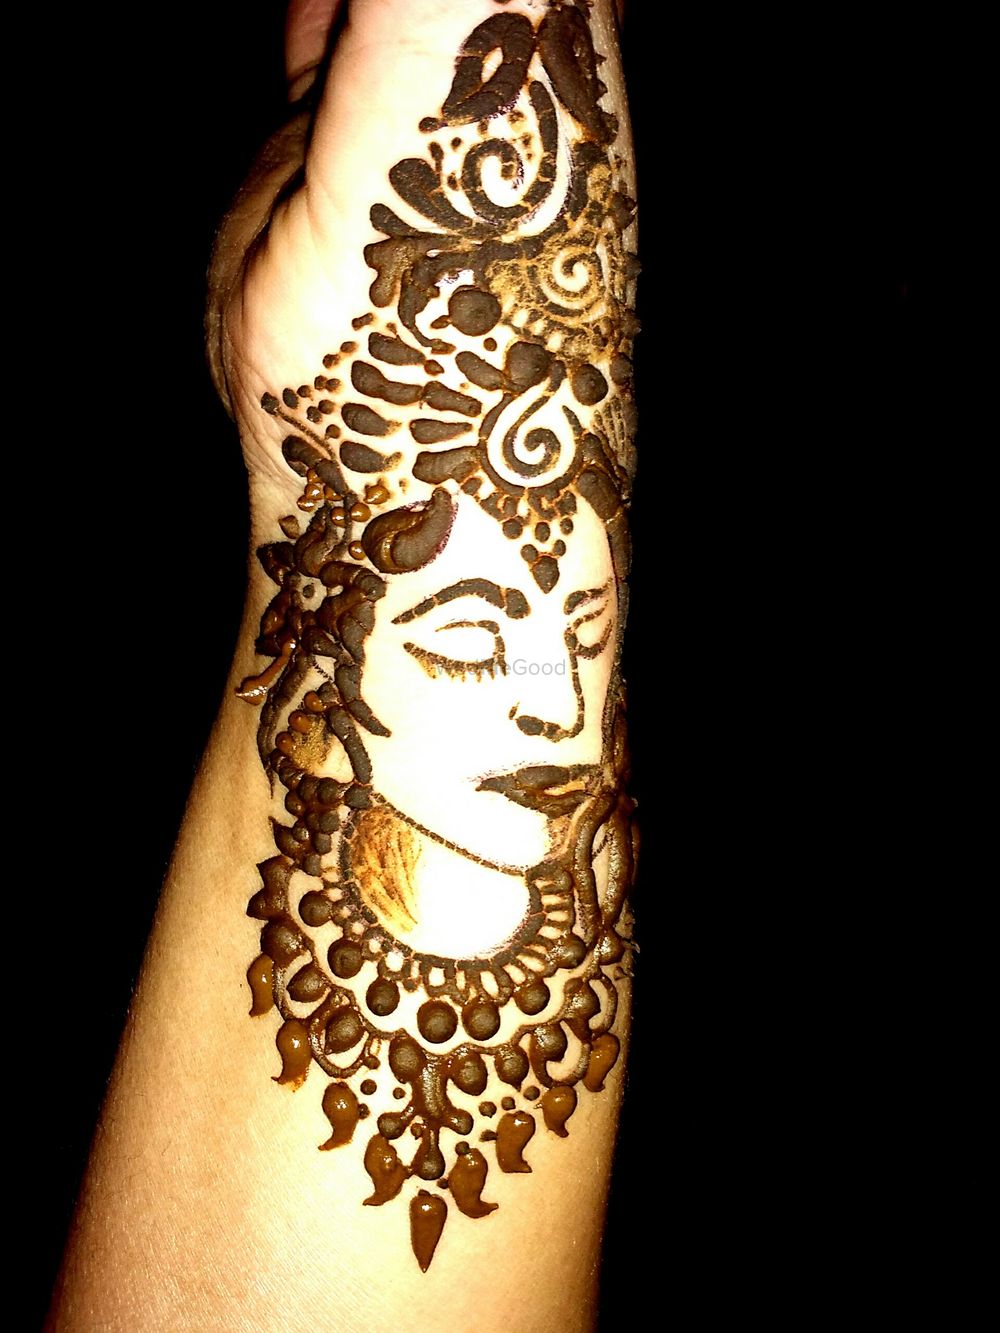 Photo From ARTISTIC FIGURES BY ART OF MEHNDI BY SUNITA KENIA  - By Art of Mehndi by Sunita Kenia